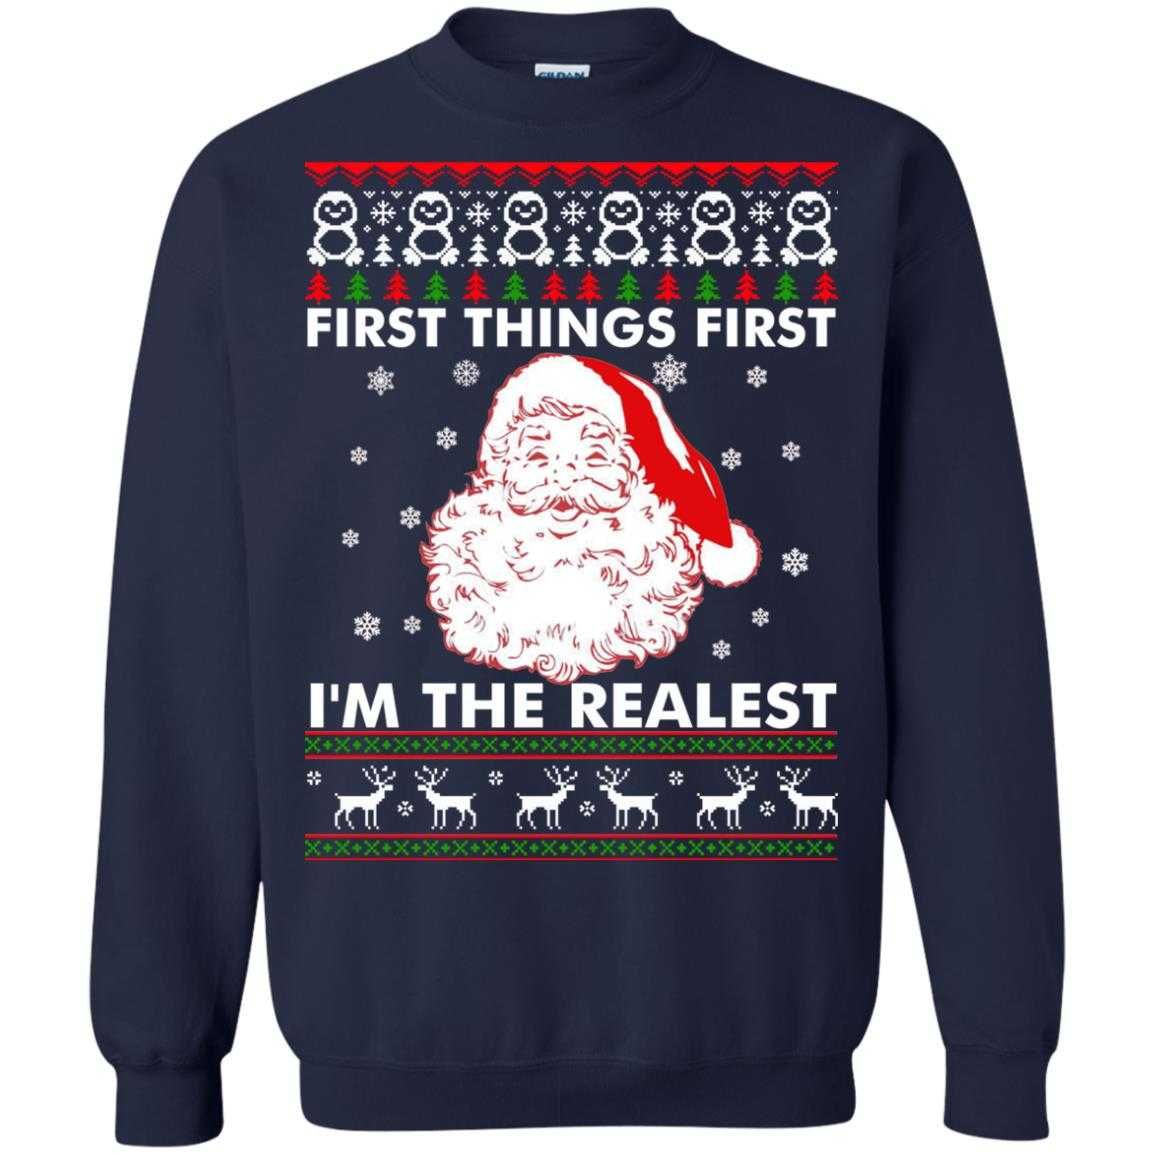 First Things First I'm The Realest Christmas Shirt Style: Sweatshirt, Color: Navy